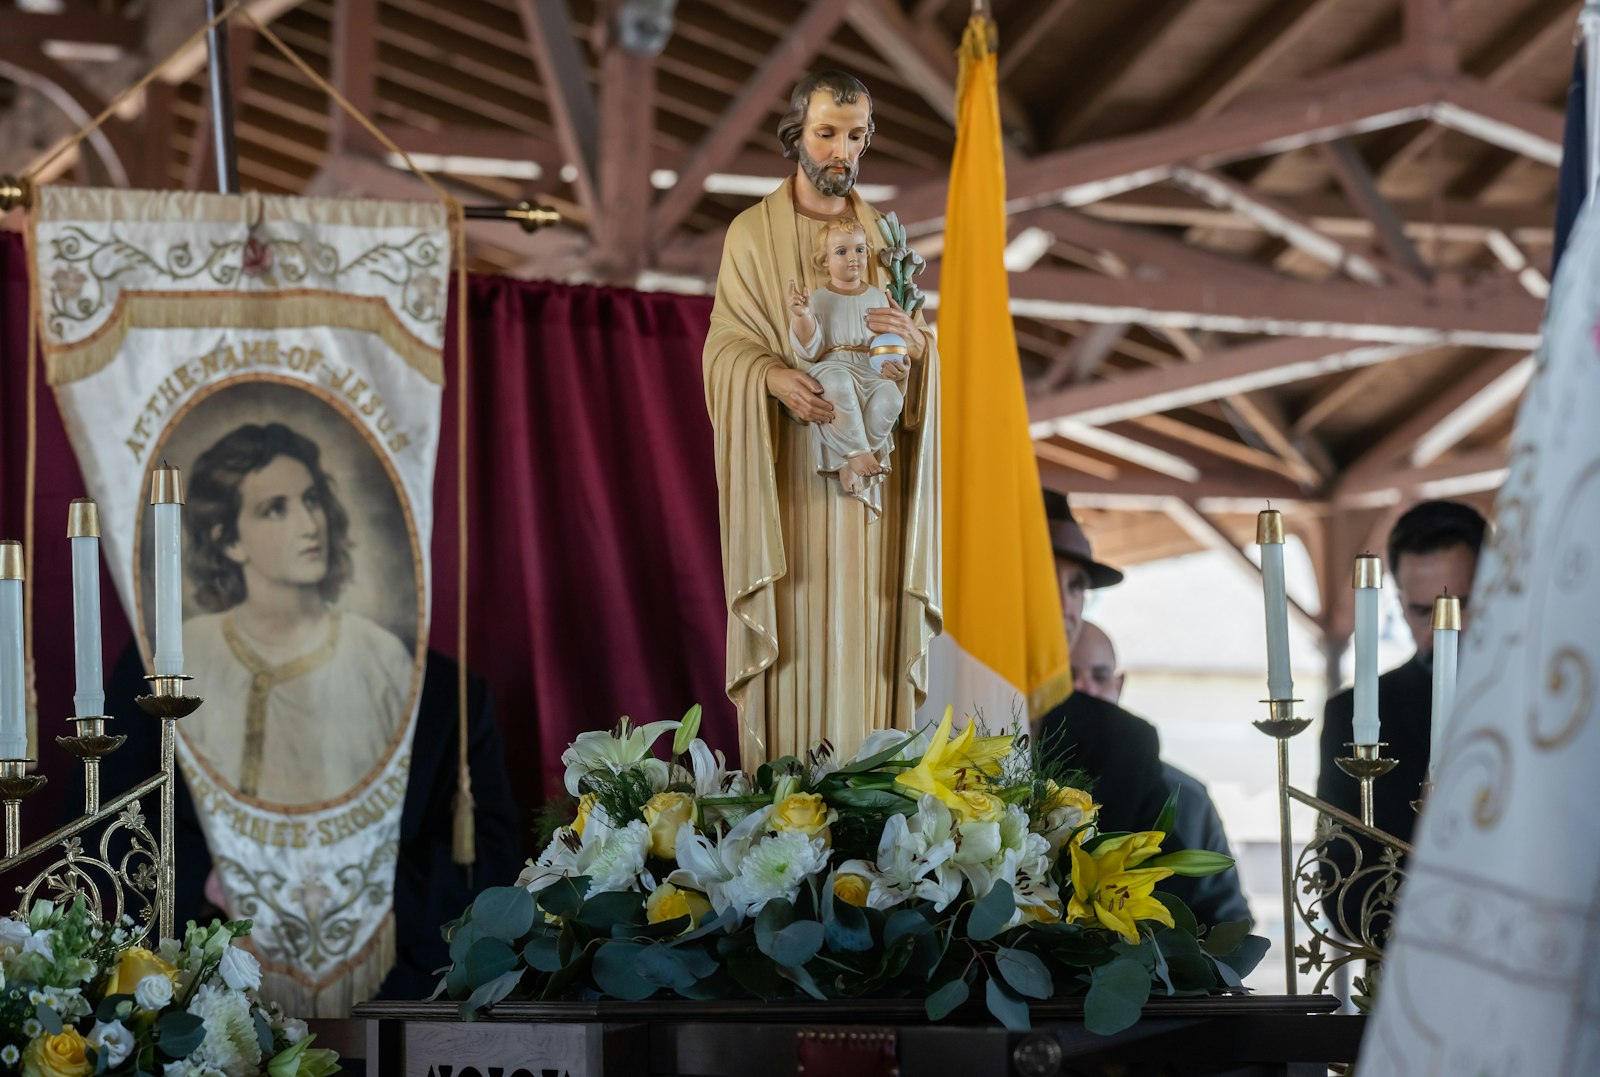 A statue of St. Joseph is displayed during veneration of a second-class relic at Detroit's Eastern Market on March 20.